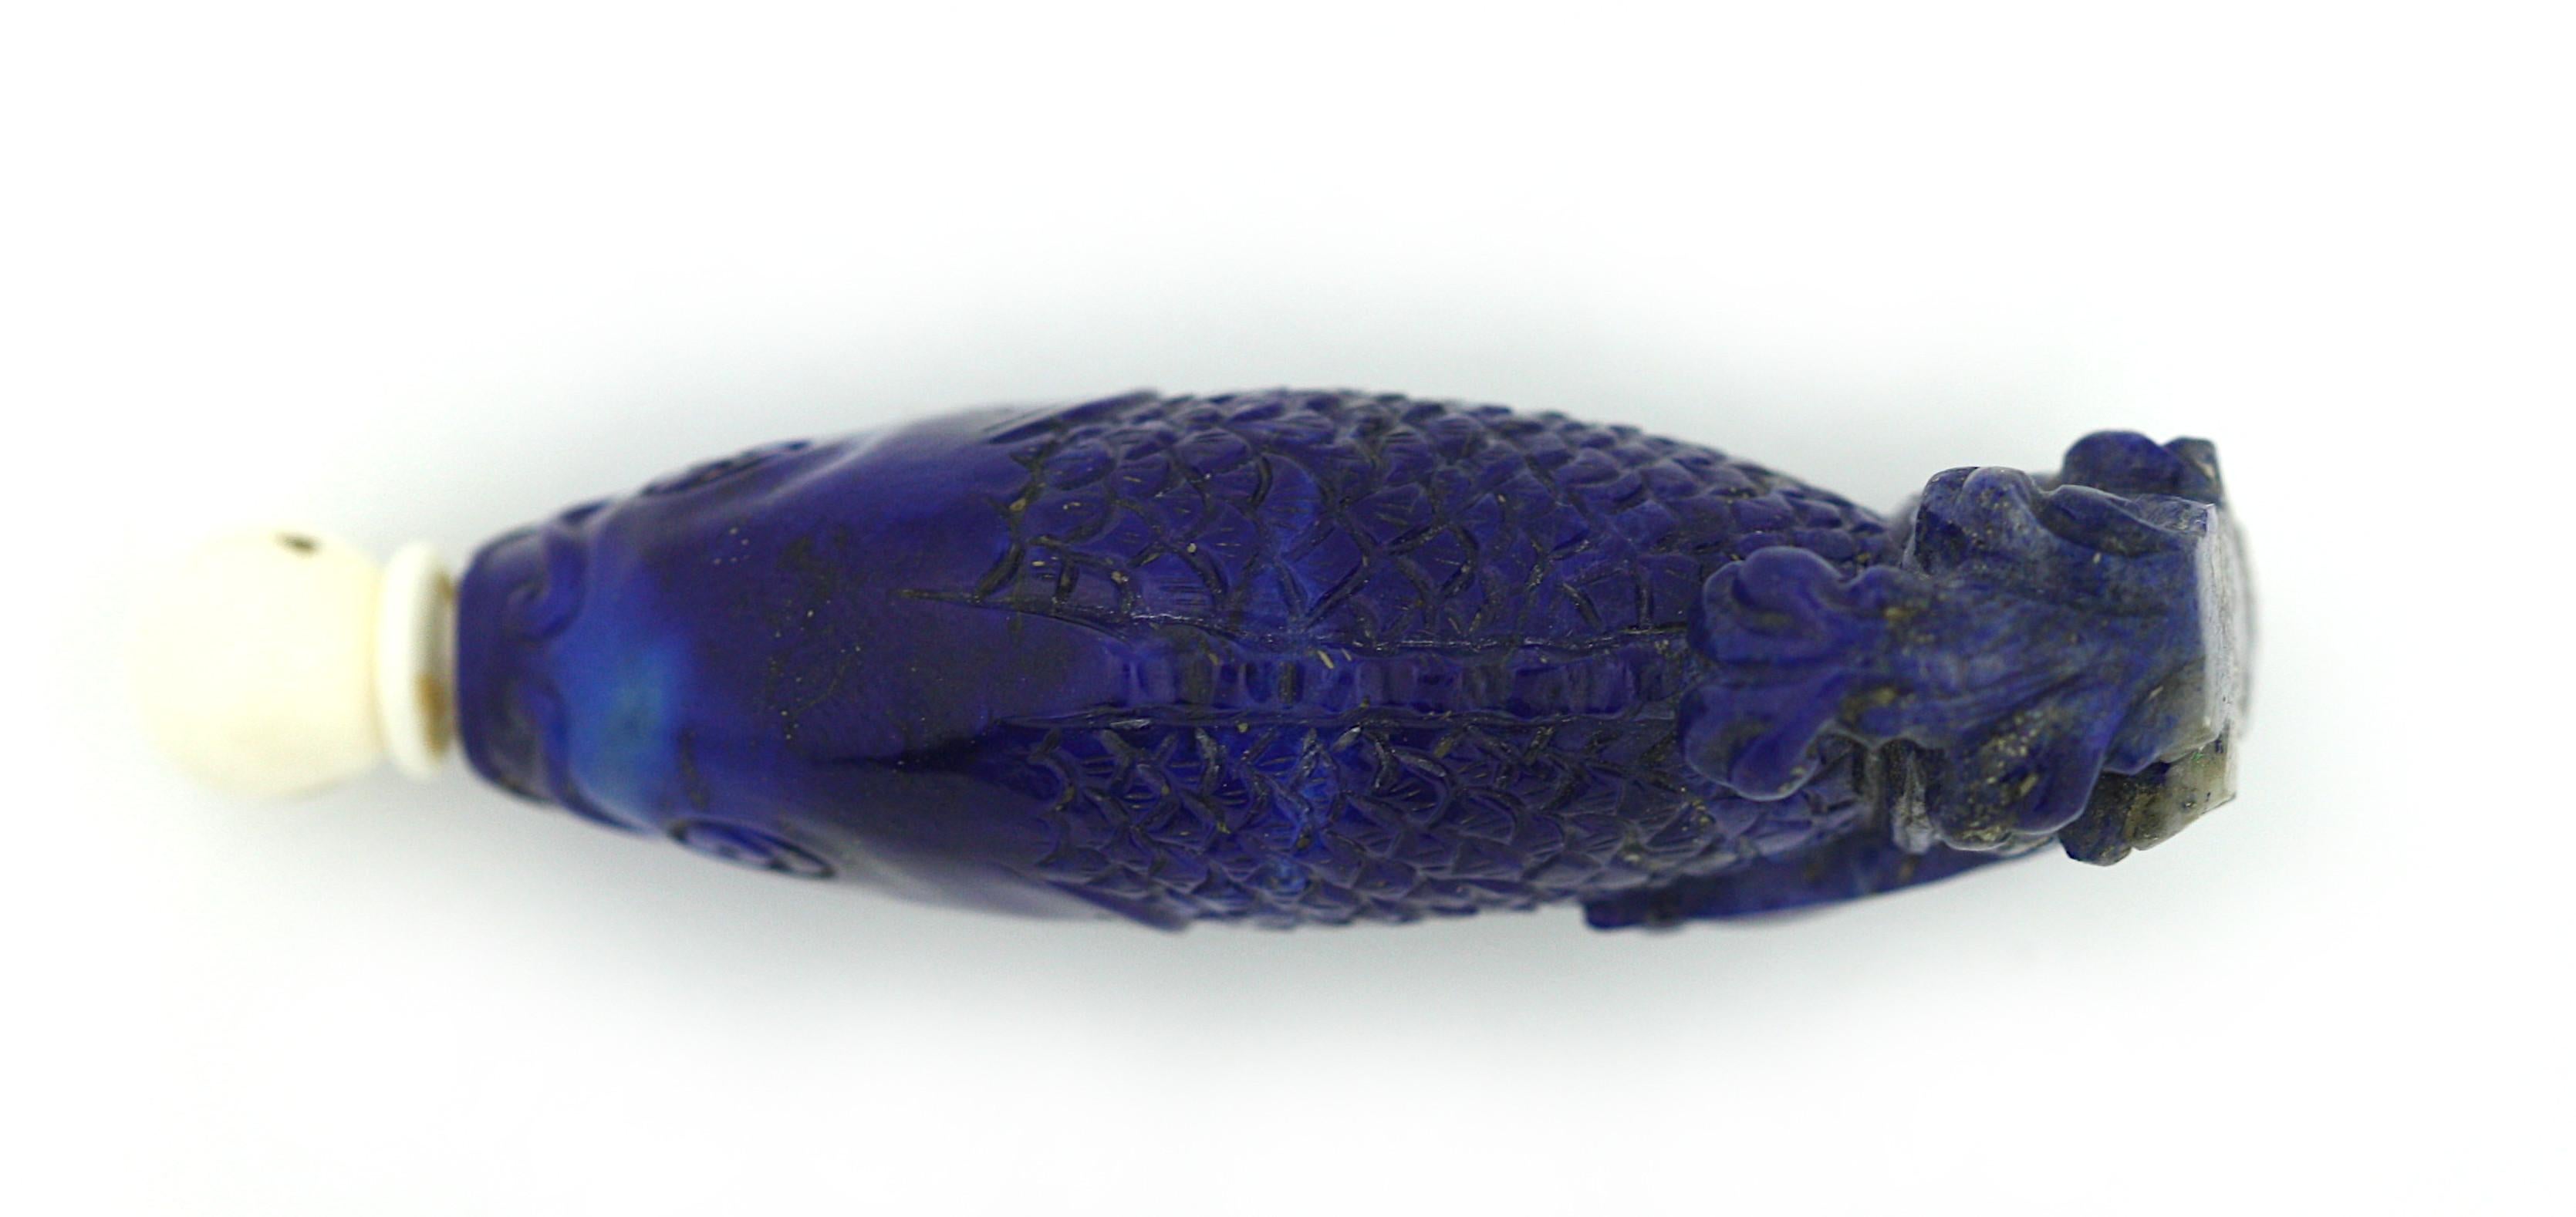 A Chinese Lapis Lazuli Snuff bottle
20th century
Carved in the form of a leaping carp, has stopper
Measures: 6.3 cm, 2 1/2 in.